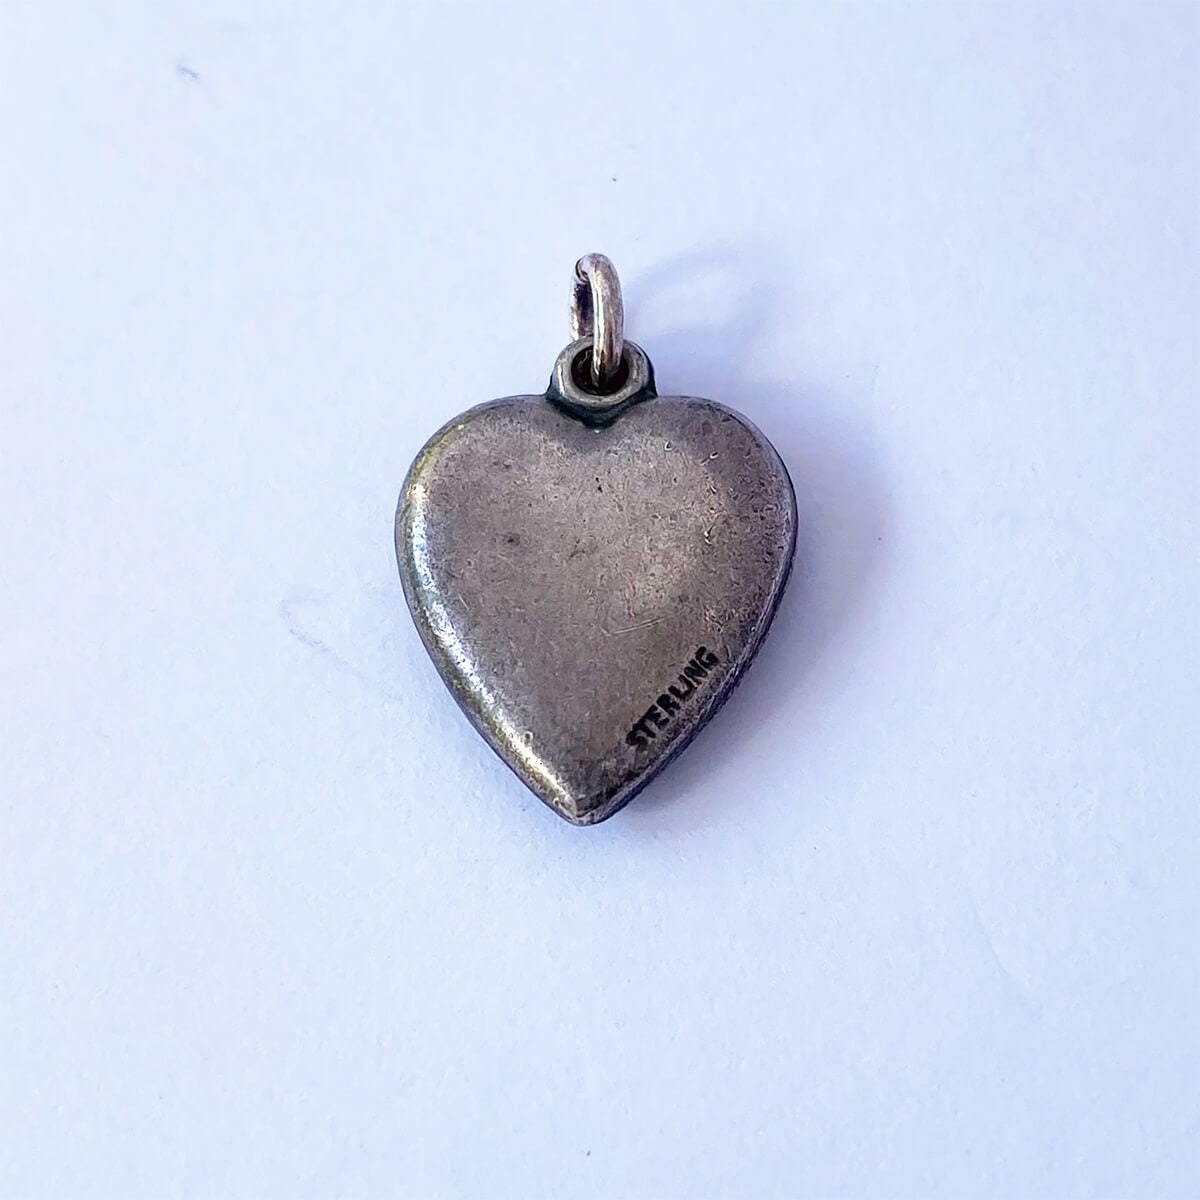 Vintage puffed heart sterling silver charm forget me not flowers charm